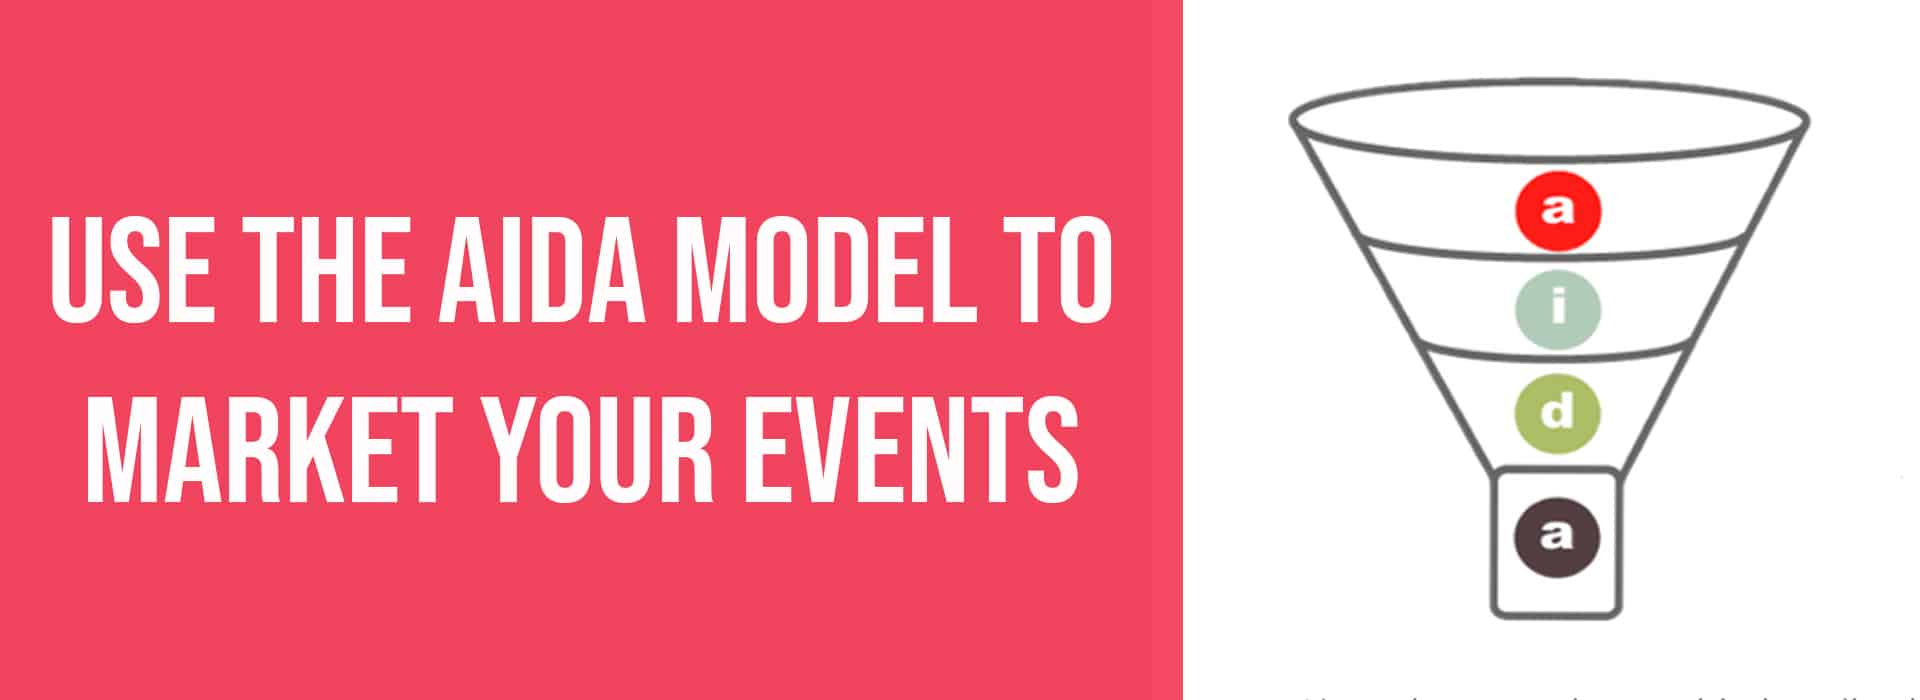 Use the Aida Model to Market Your Events